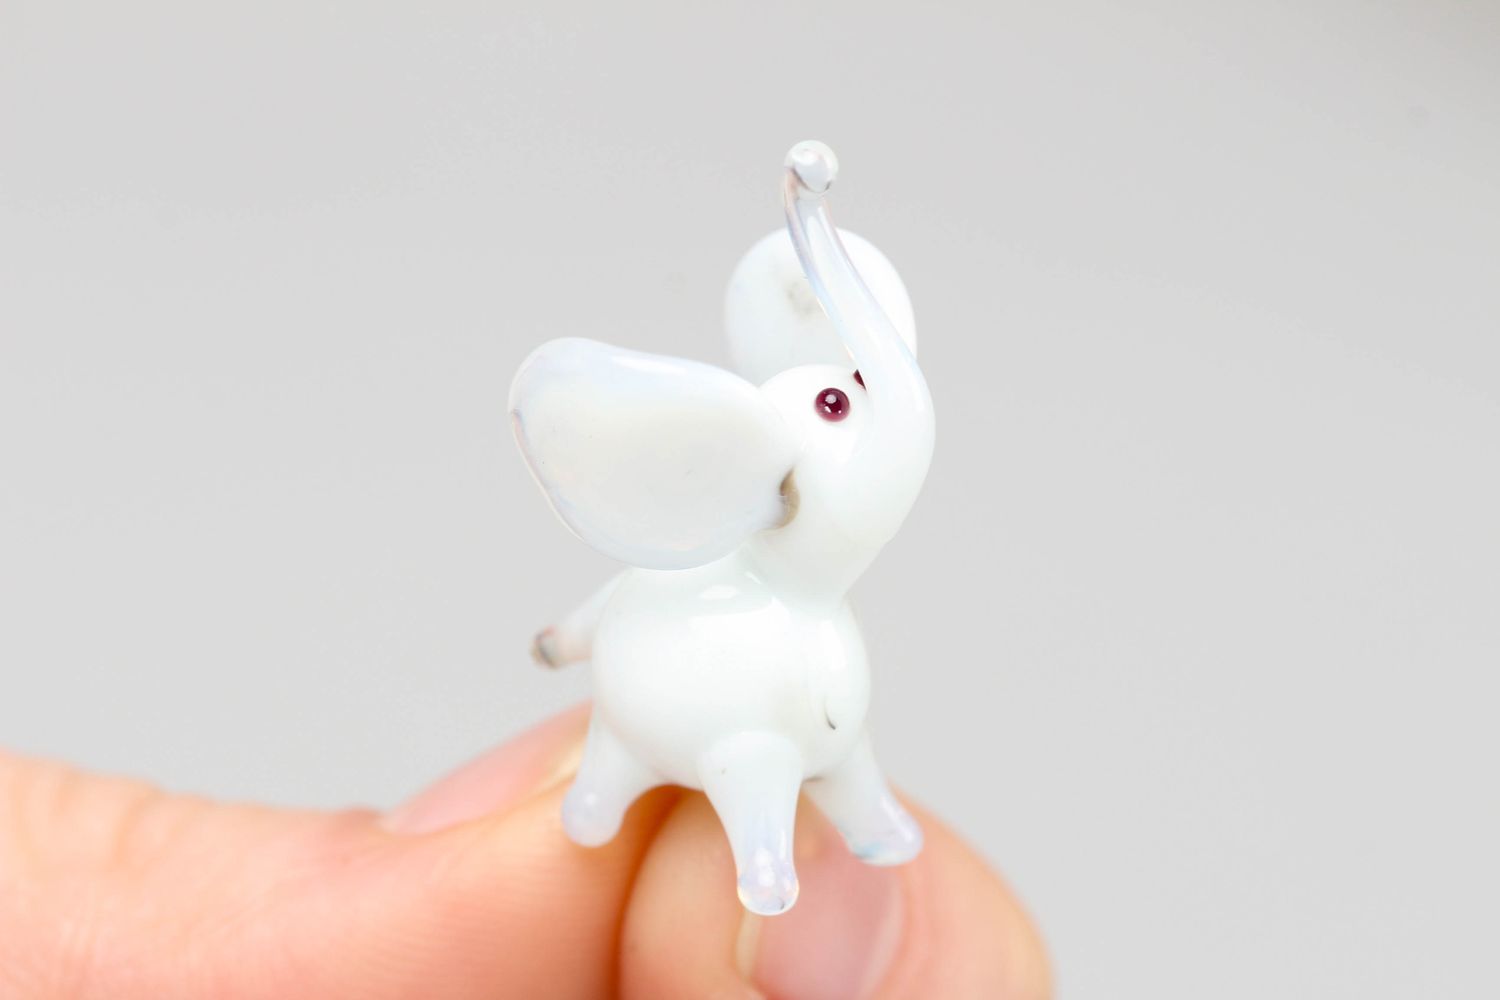 Collectible glass statuette of white elephant photo 3